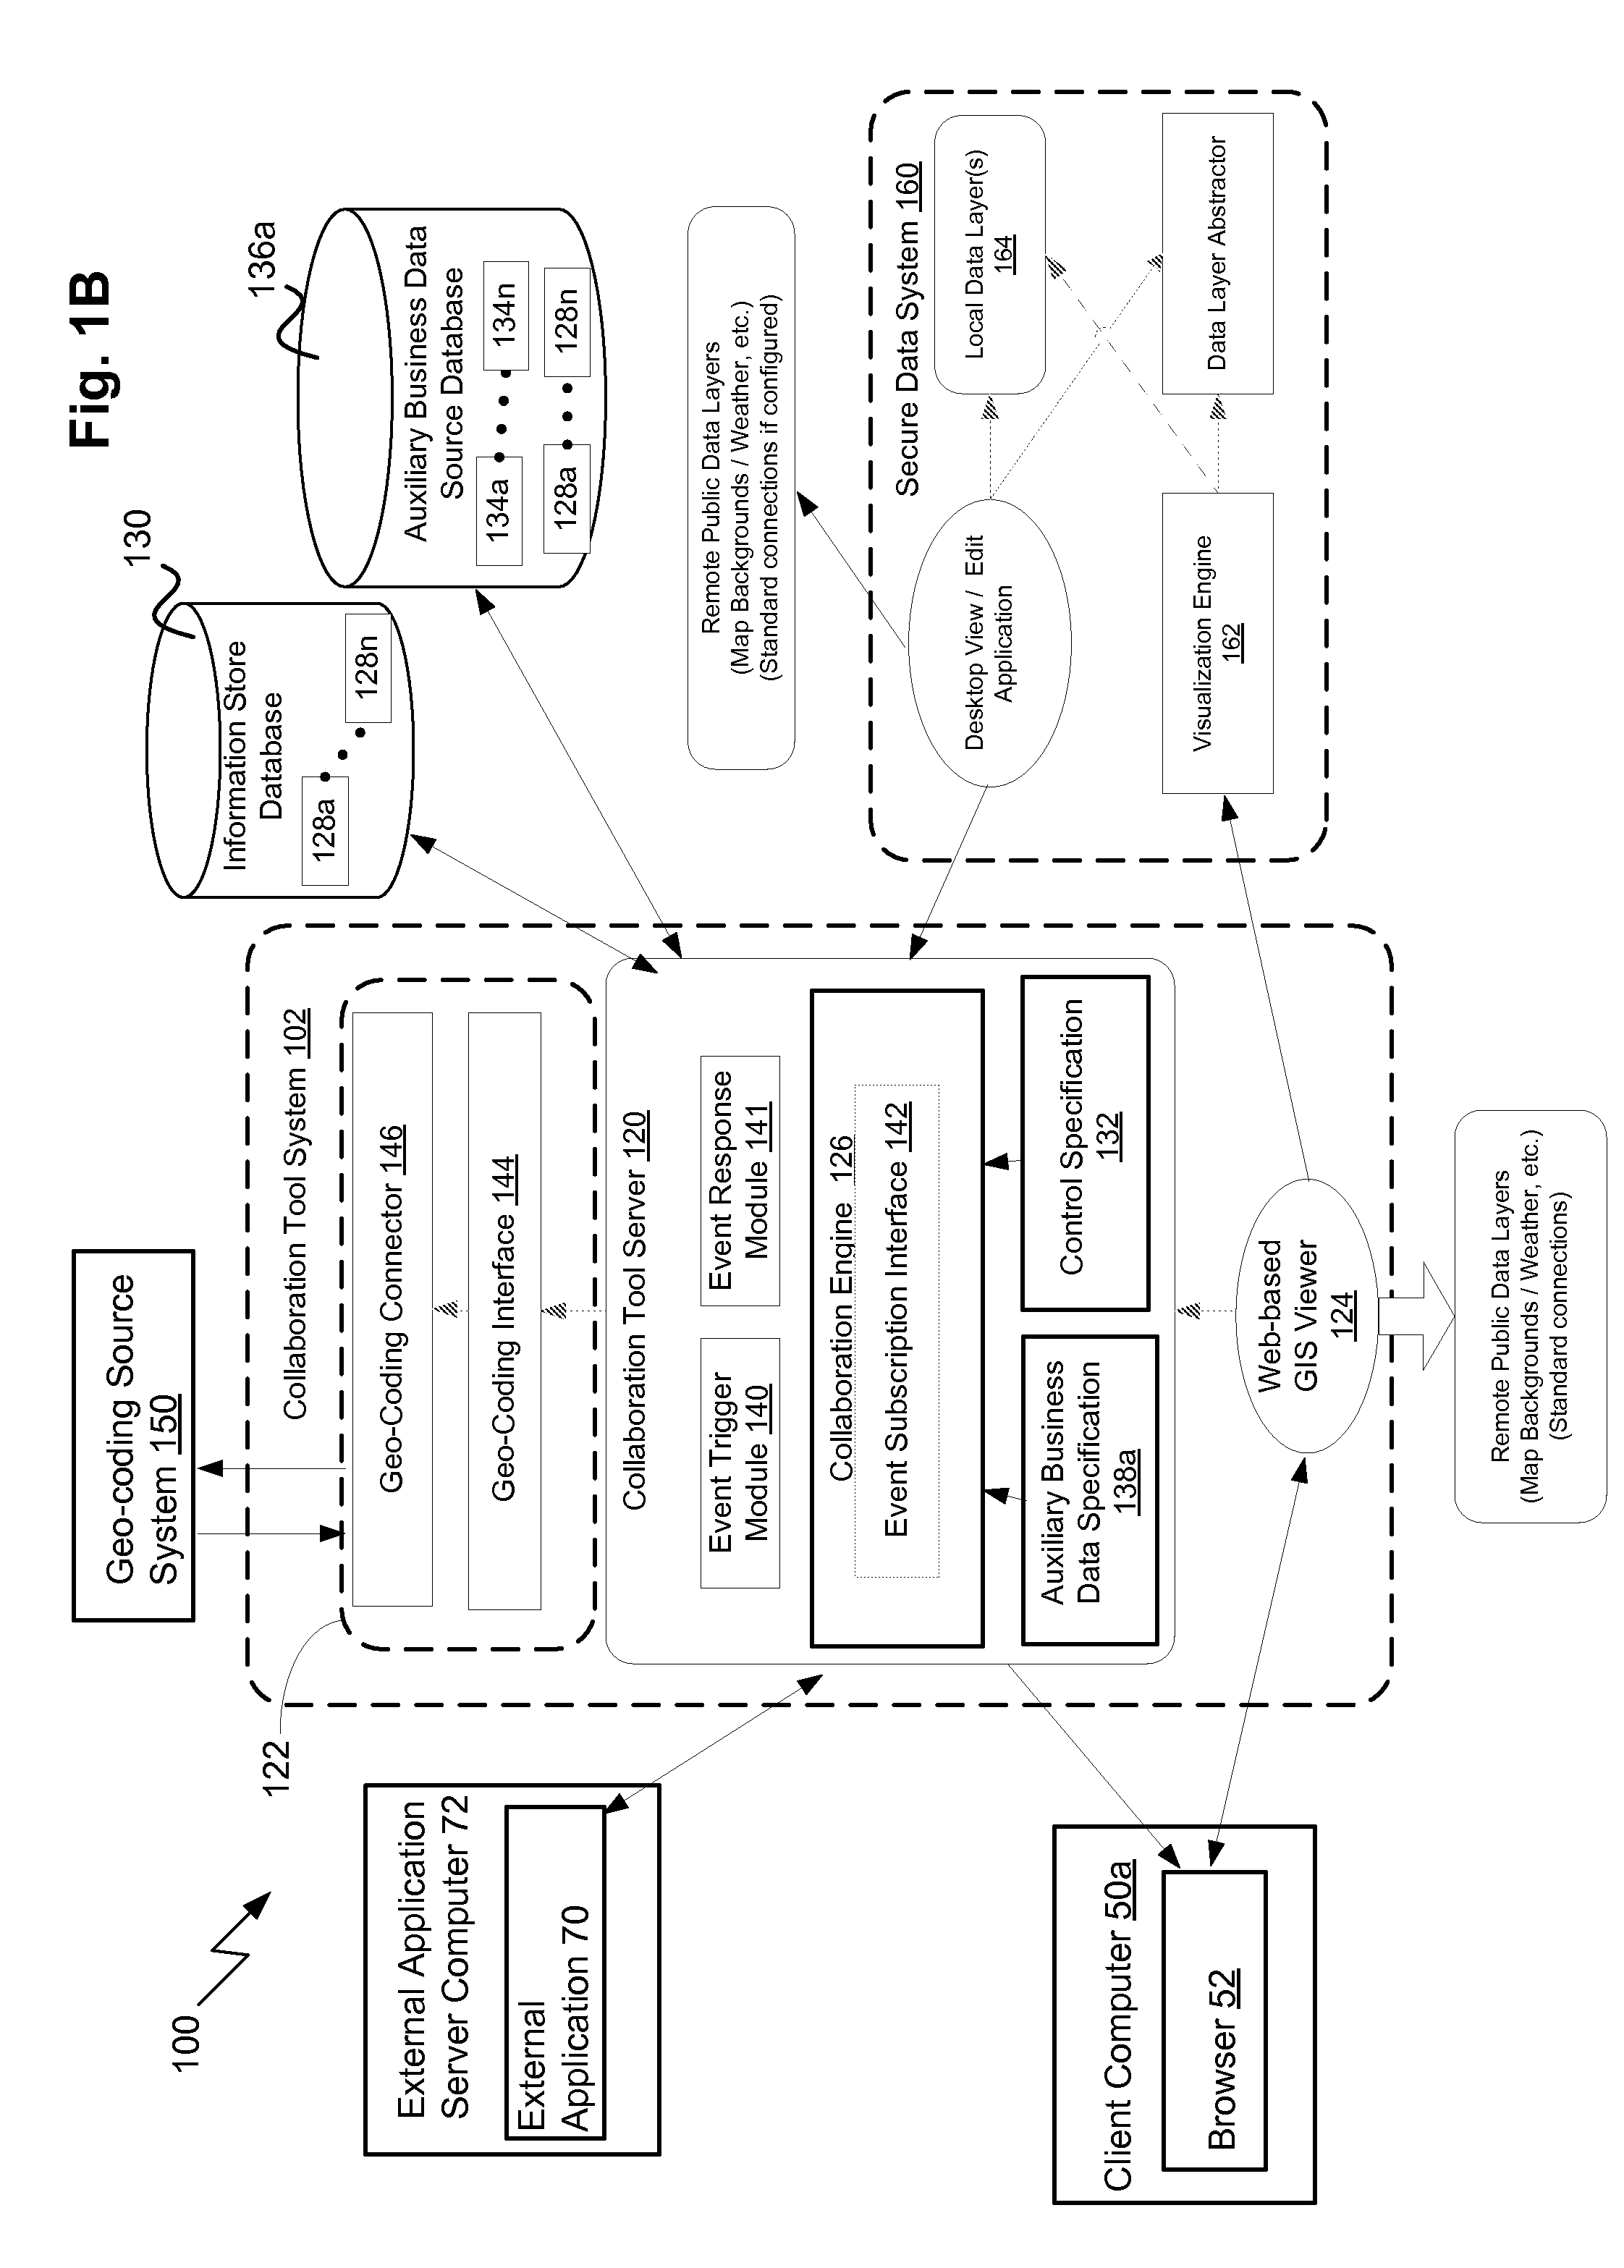 System and method for extending the business data associated with a network-based user collaboration tool to include spatial reference information for collaborative visualization